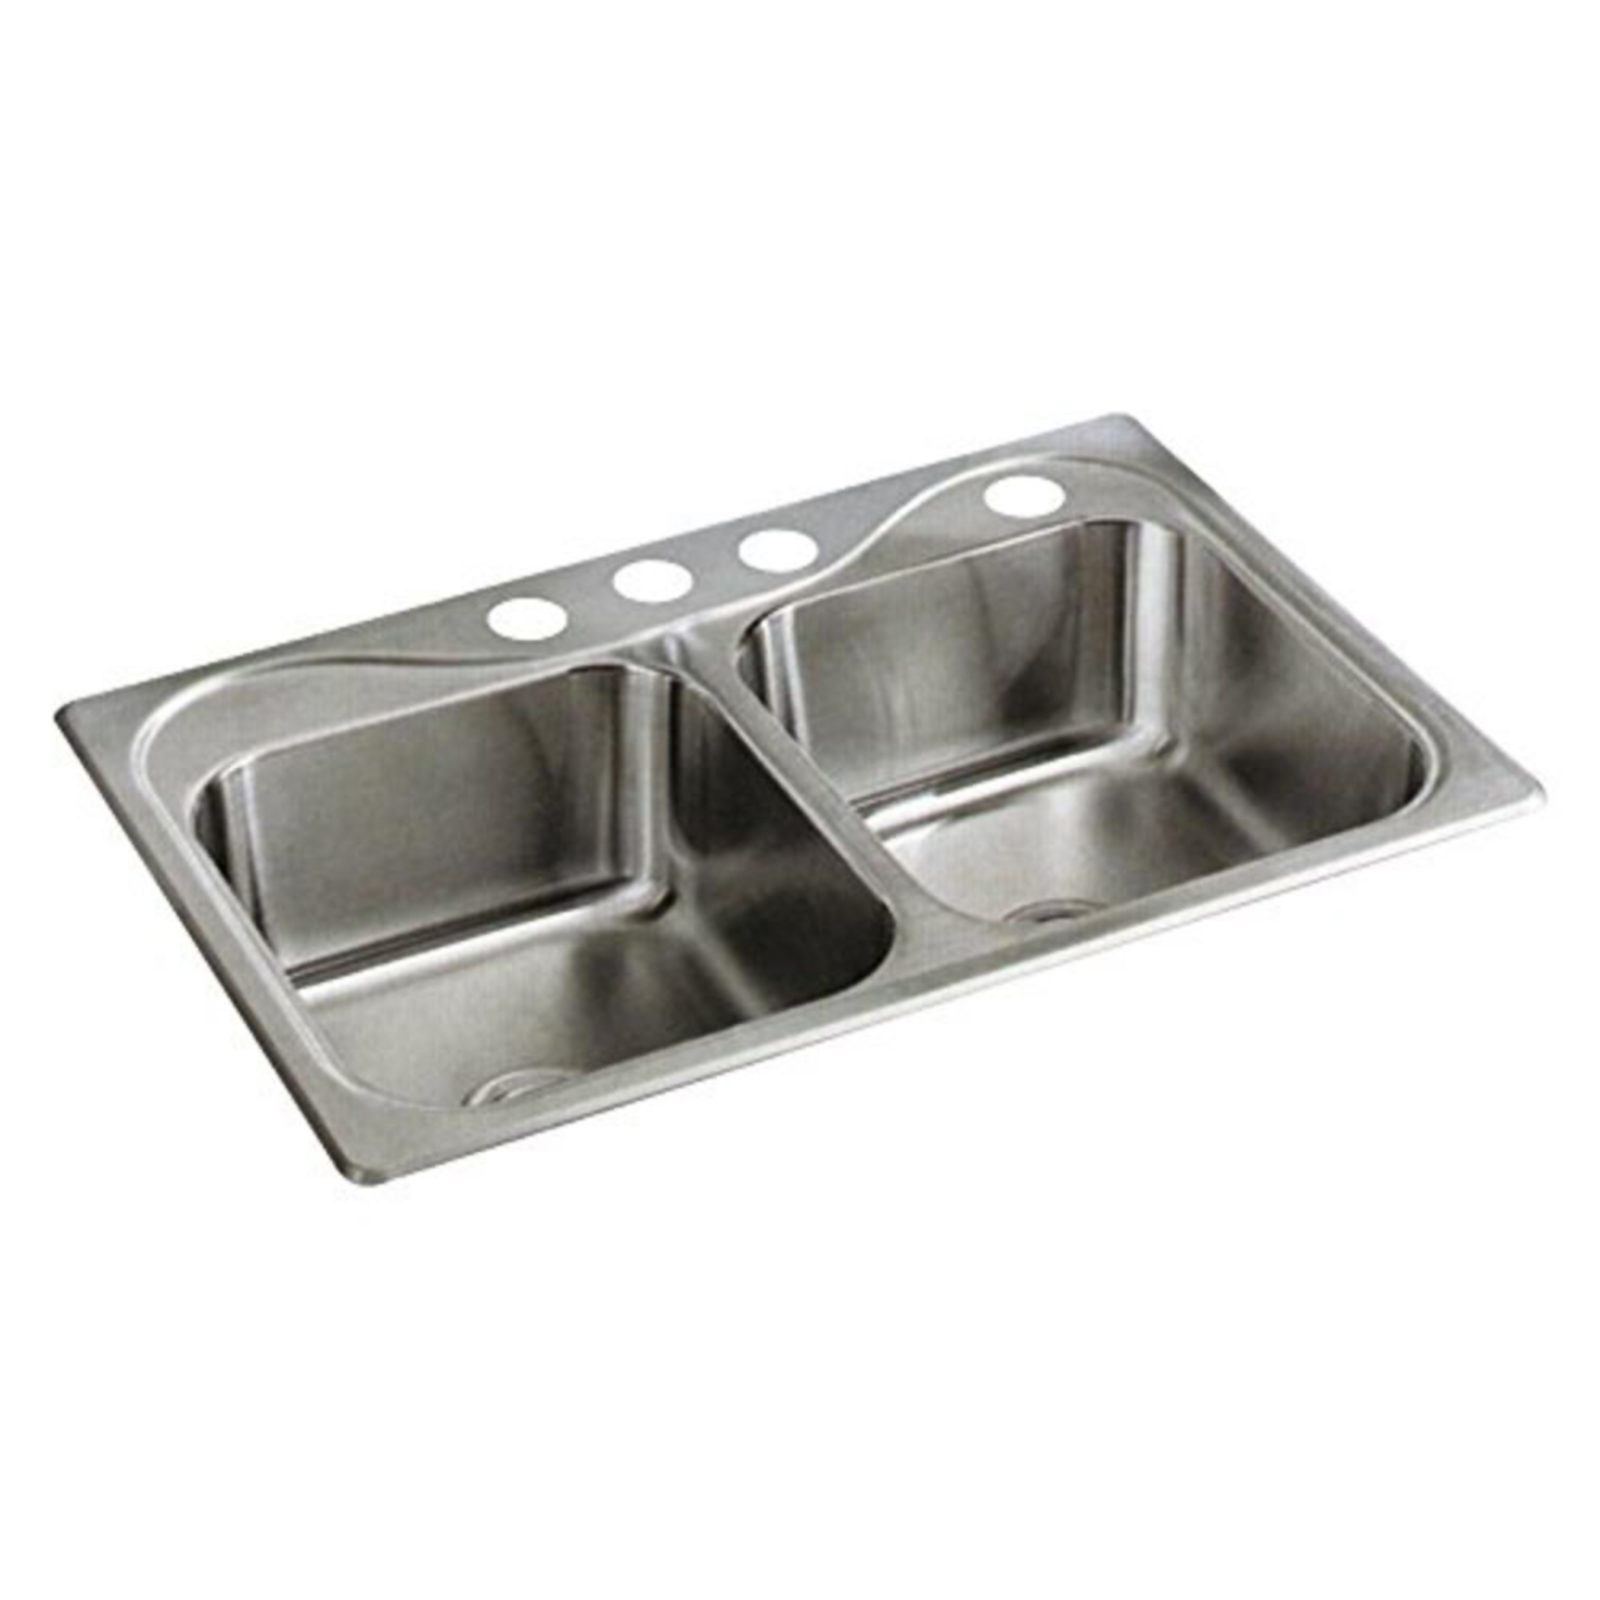 Sterling Southhaven 33" 50/50 Double Bowl Stainless Steel Topmount Kitchen Sink - Satin